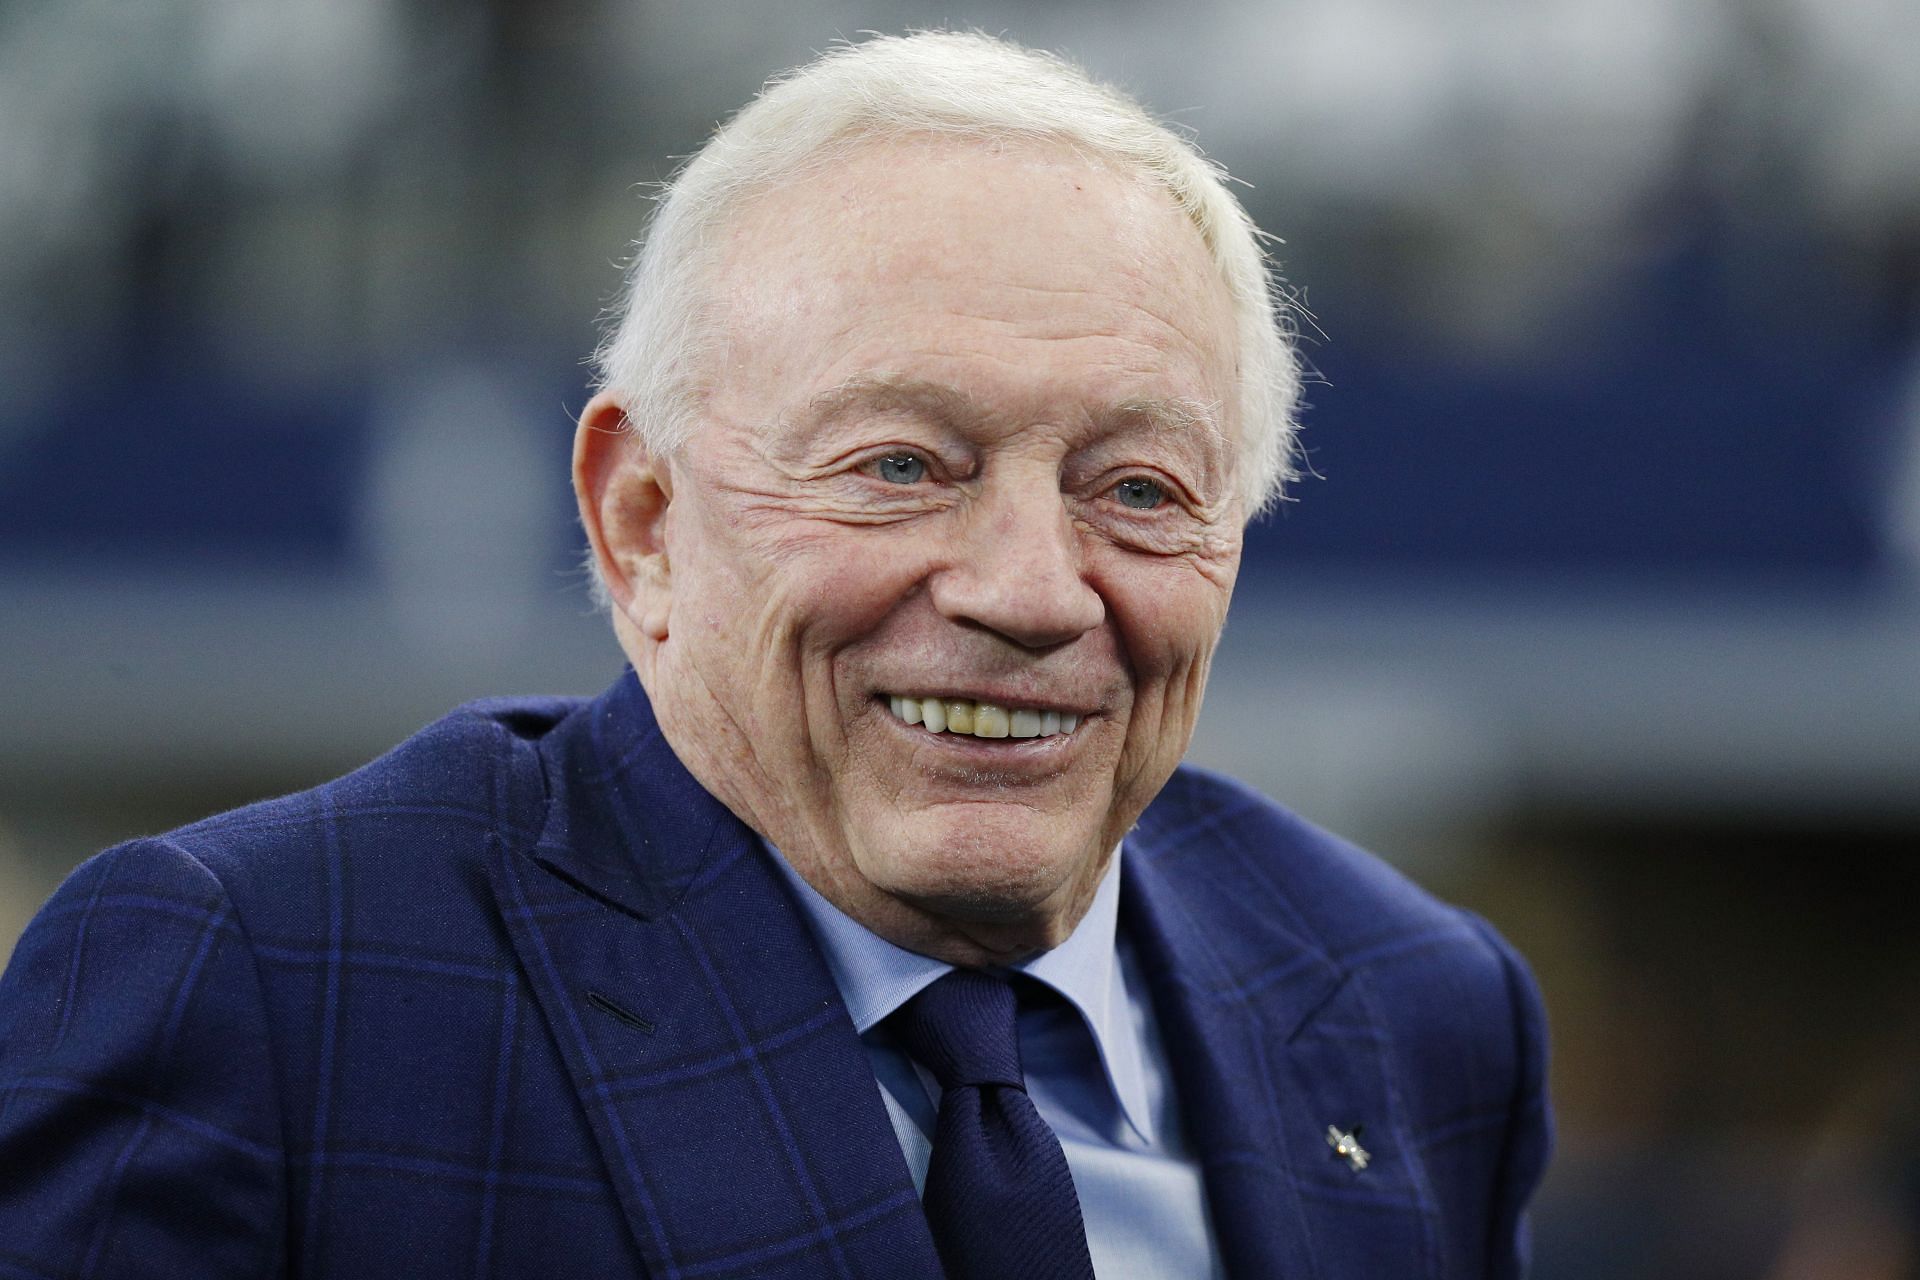 Cowboys criticized over deal with gun-themed coffee company